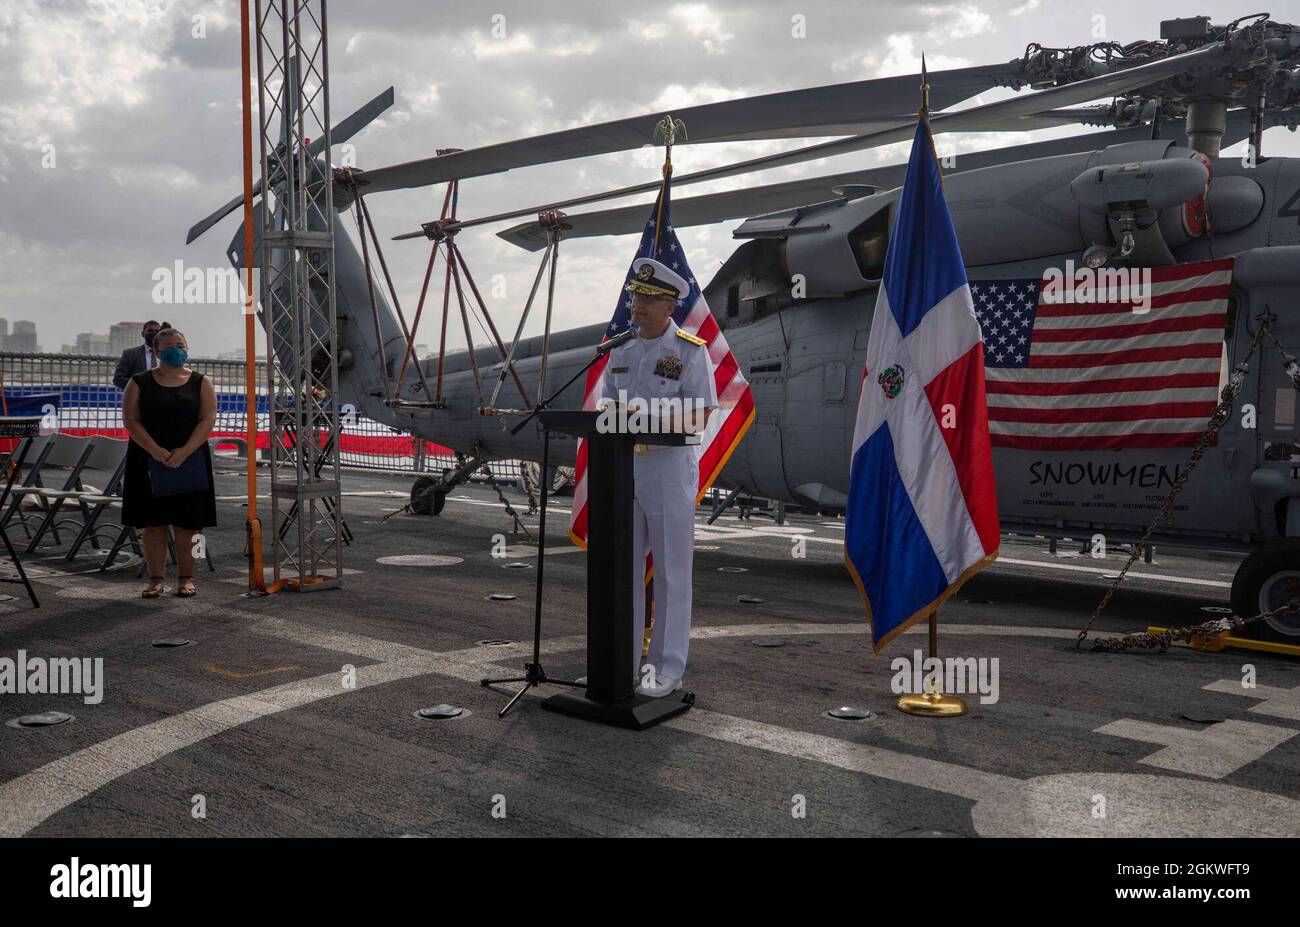 210709-N-KY668-1293   SANTO DOMINGO, Dominican Republic - (July 9, 2021) – Rear Adm. Don Gabrielson, commander of U.S. Naval Forces Southern Command/U.S. 4th Fleet, gives remarks during a reception on the flight deck aboard the Freedom-variant littoral combat ship USS Billings (LCS 15), July 9, 2021. Billings conducted a three-day port visit in Santo Domingo, Dominican Republic, and the ship hosted a reception aboard for government and military leaders. Billings is deployed to the U.S. 4th Fleet area of operations to support Joint Interagency Task Force South’s mission, which includes counter- Stock Photo